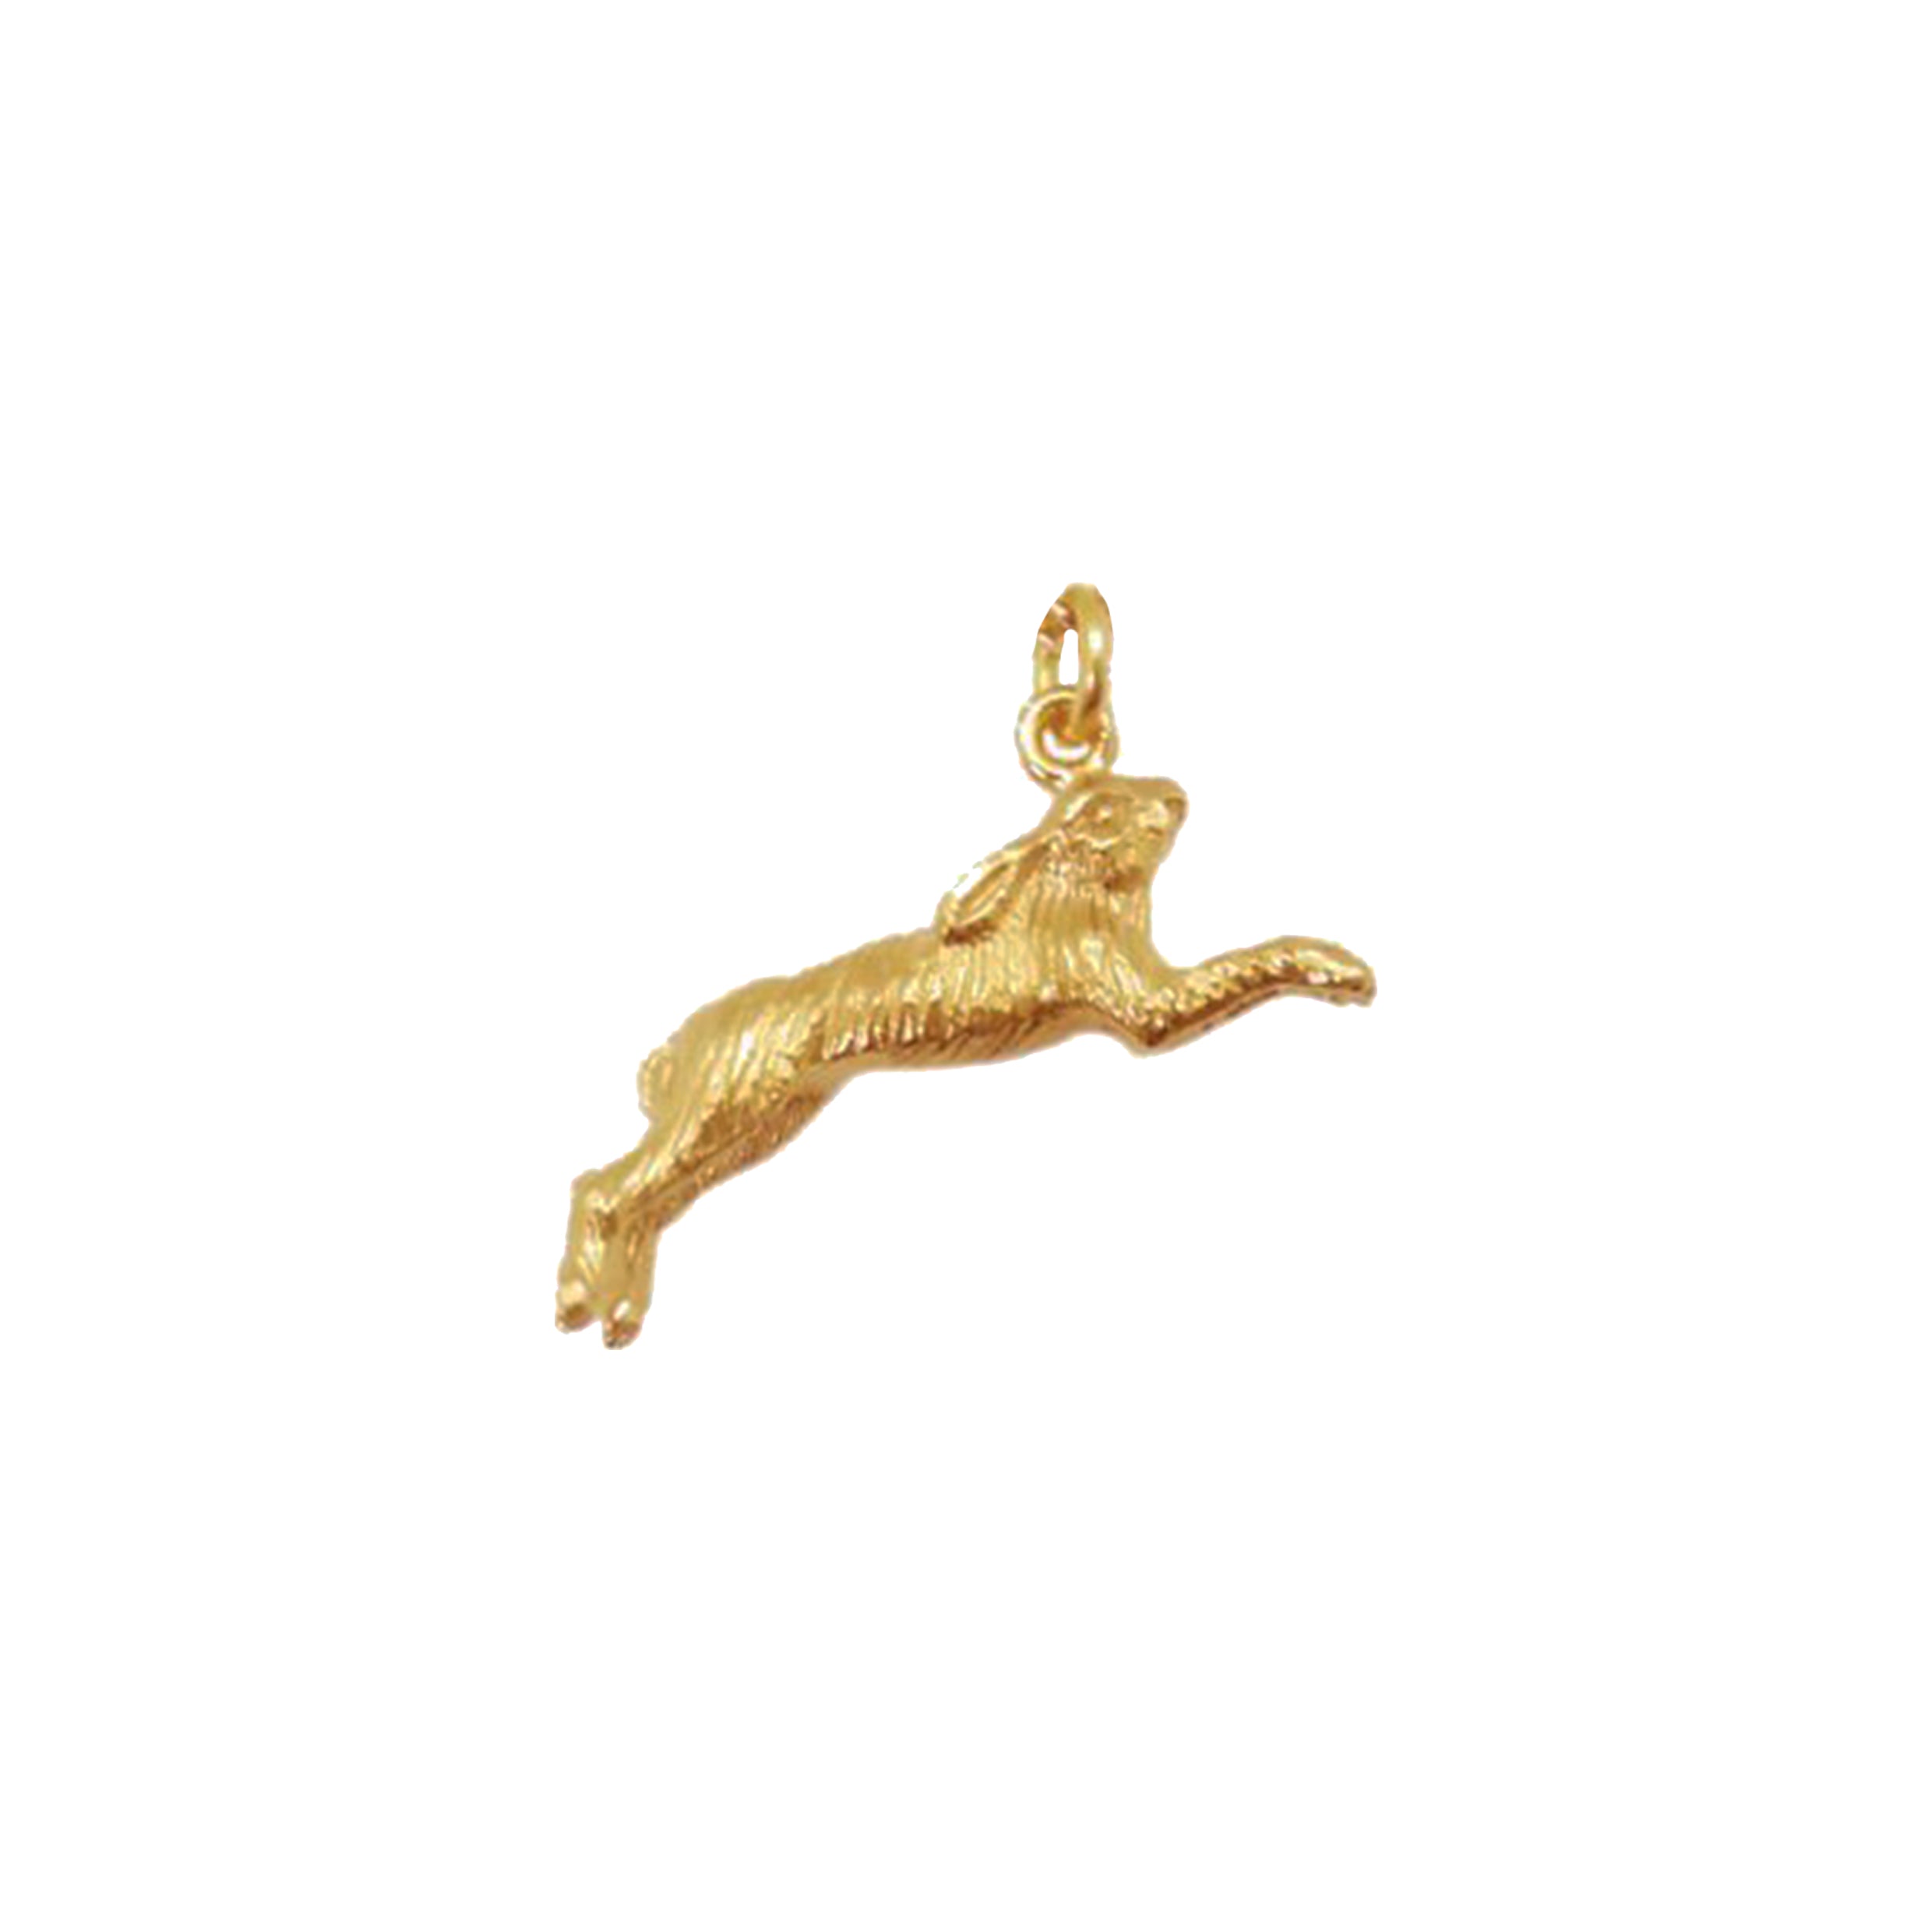 Leaping Hare Small Charm - Mirabelle Jewellery